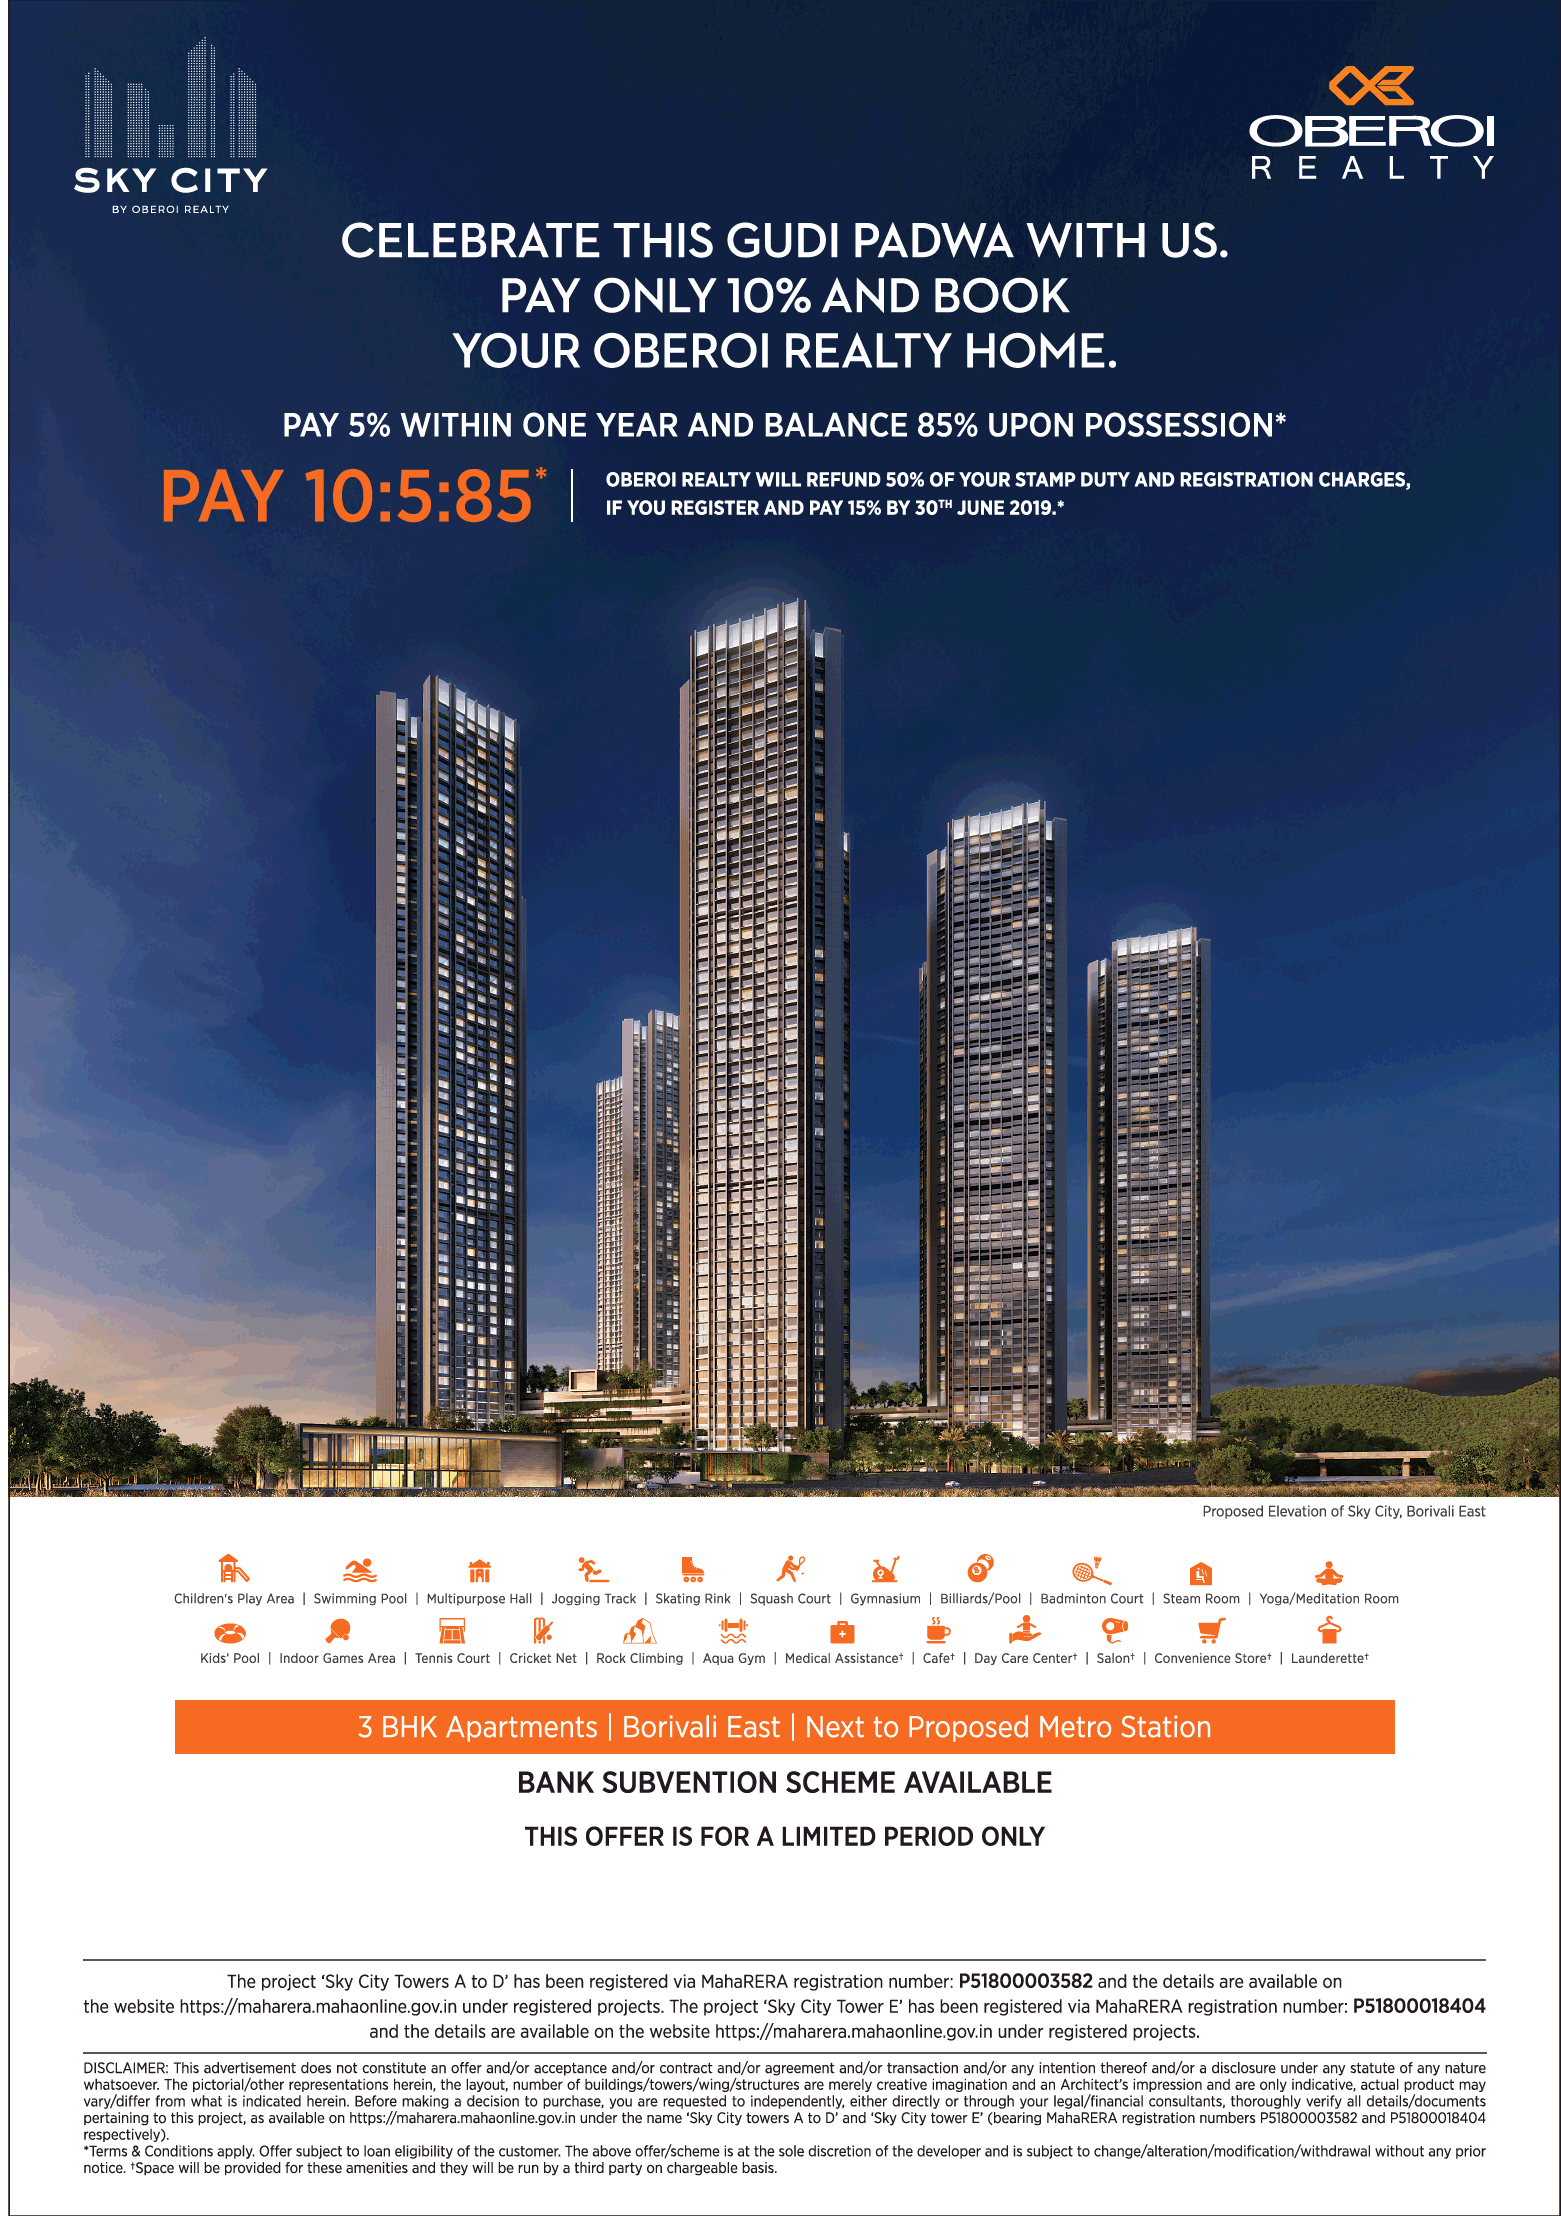 Pay only 10% & book your home at Oberoi Sky City in Mumbai Update